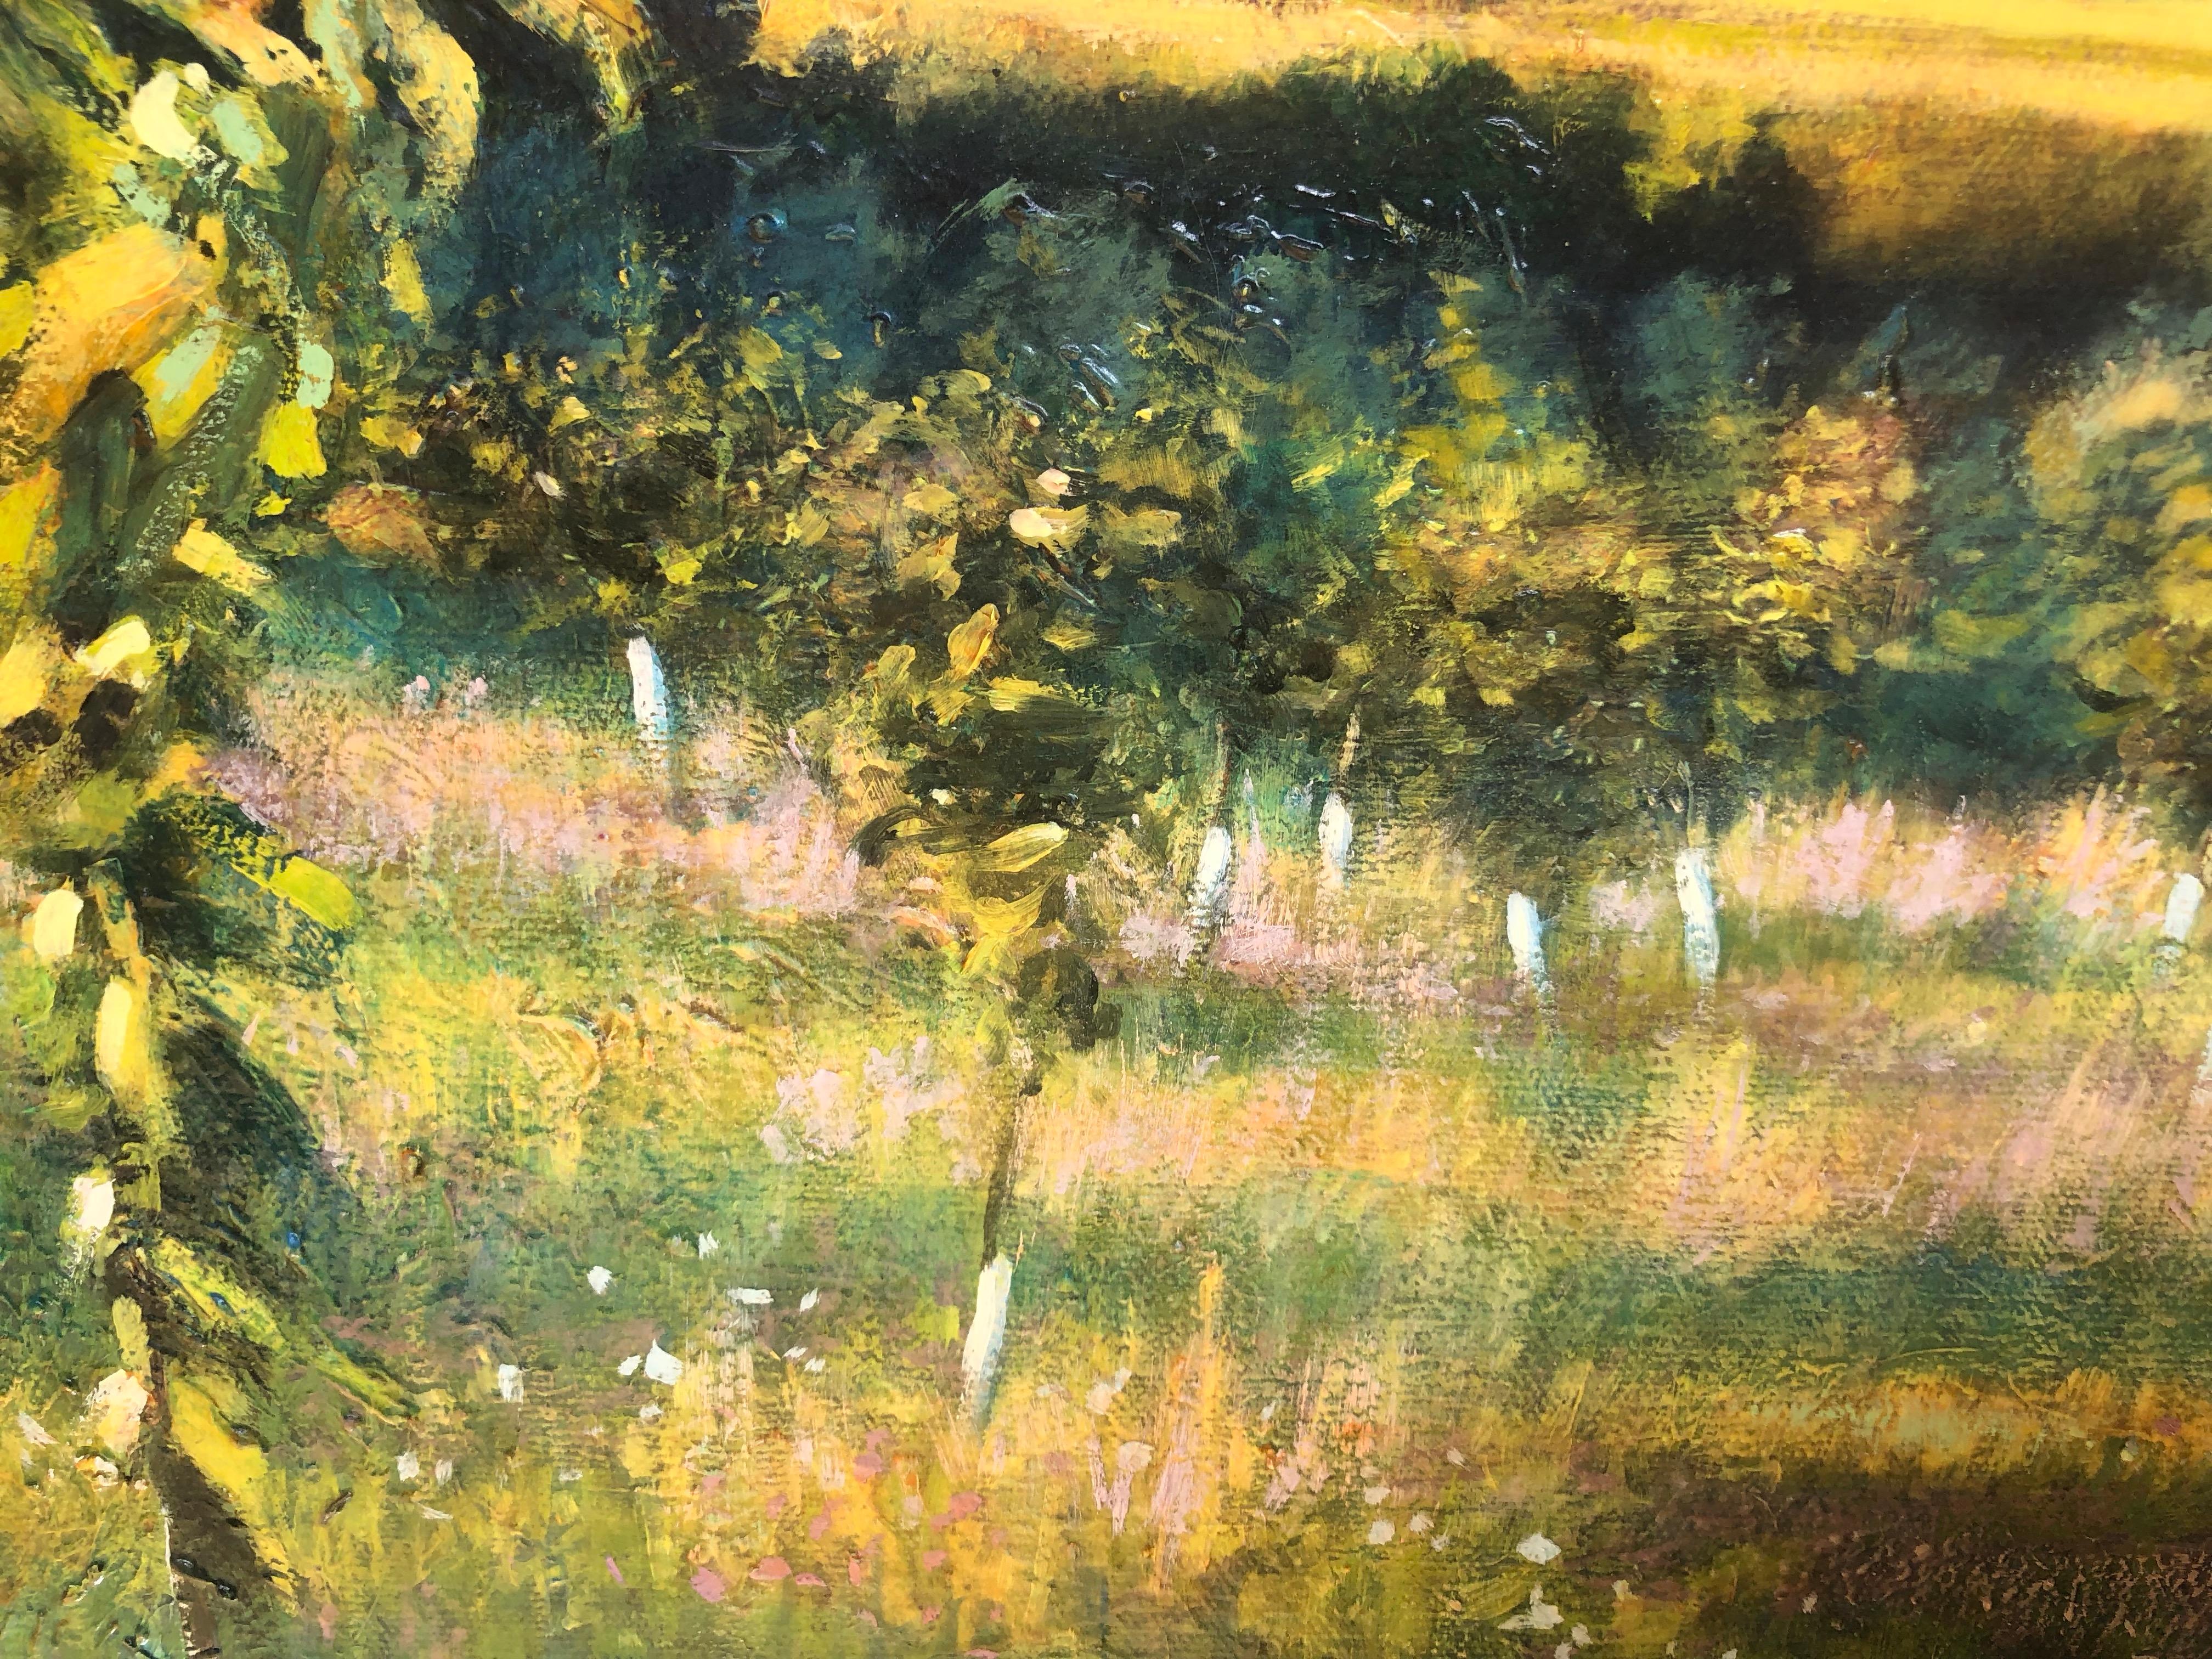 Orchard Path - Original Oil Painting of Orchard and Hills Bathed in Spring Light 7